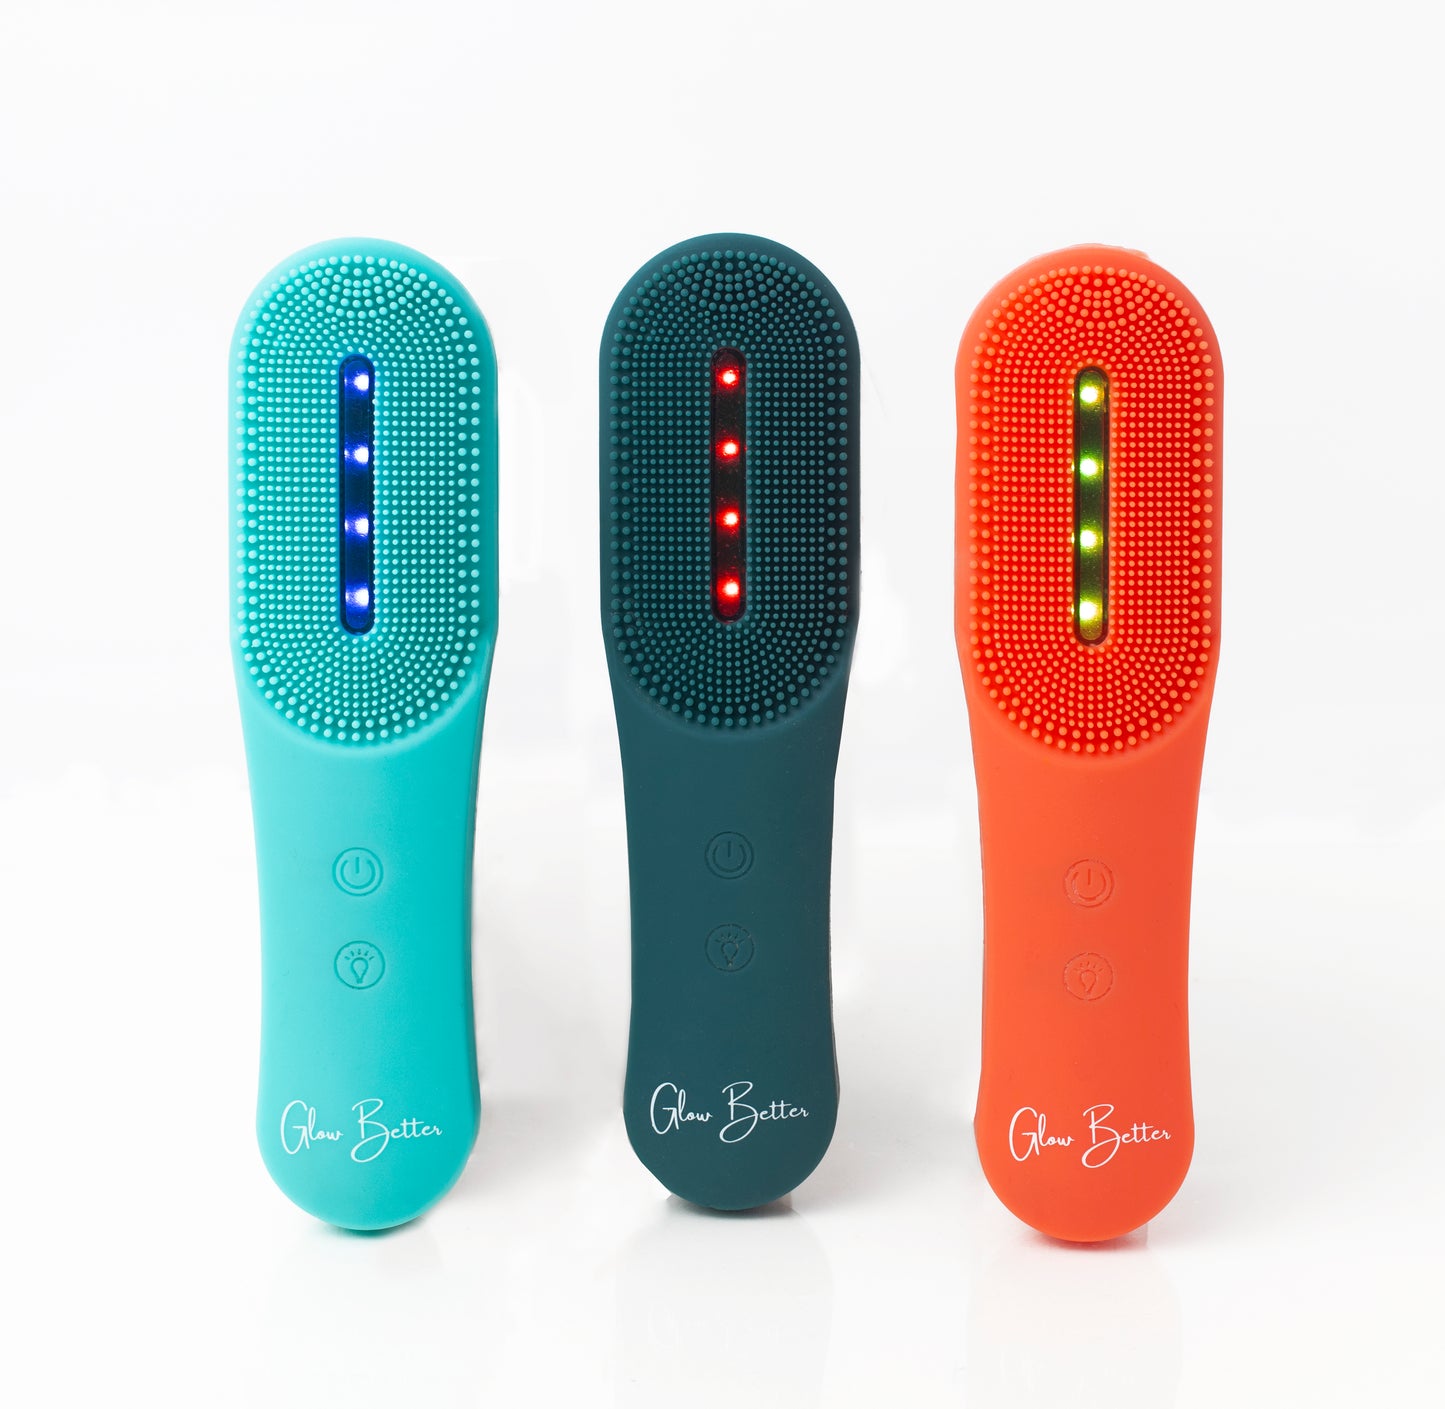 Glow Better LED/Silicone Cleansing Brush